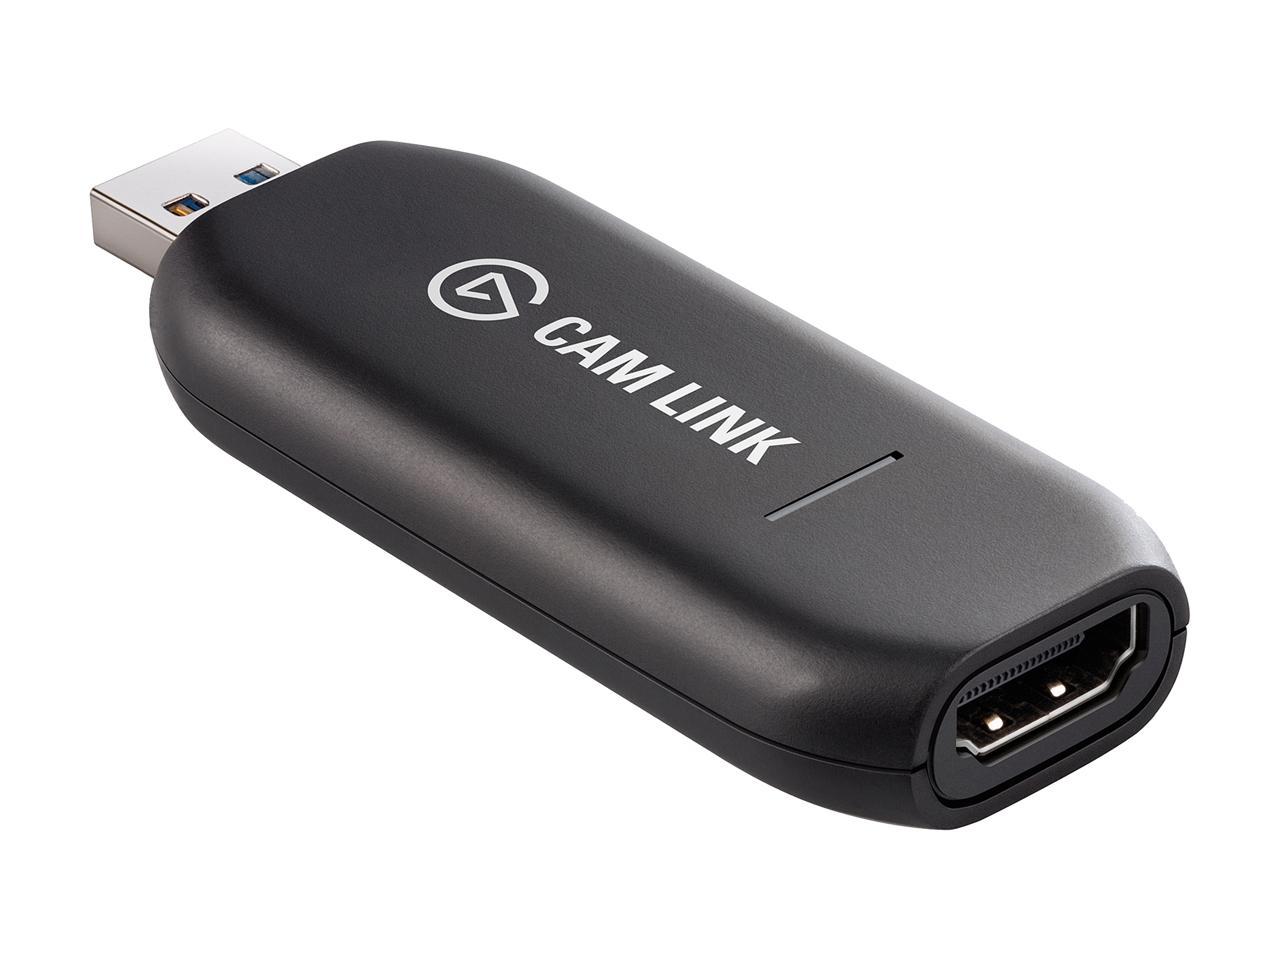 Elgato Cam Link 4K - HDMI to USB 3.0 Camera Connector, Broadcast Live and Record in 1080p60 or 4K at 30 fps via a Compatible DSLR, Camcorder or Action Cam - image 2 of 5